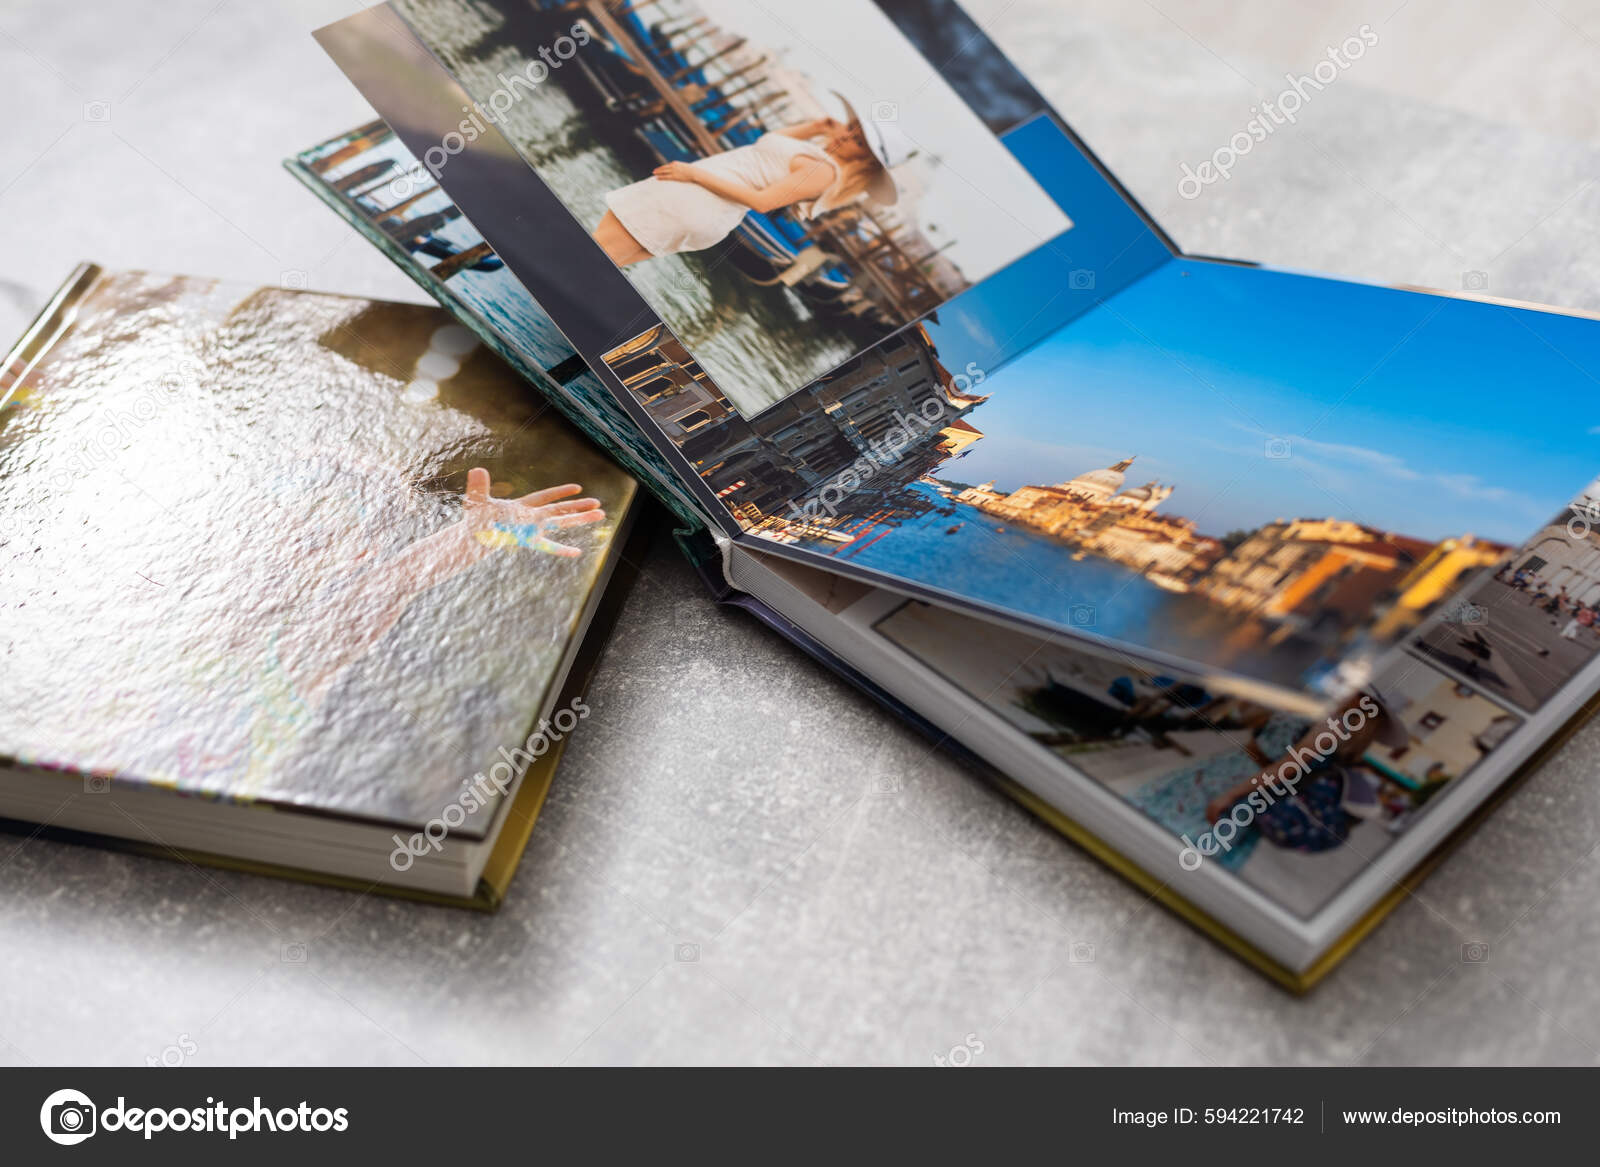 Photobook Album with Travel Photo on Table Stock Image - Image of coffee,  holiday: 256476255